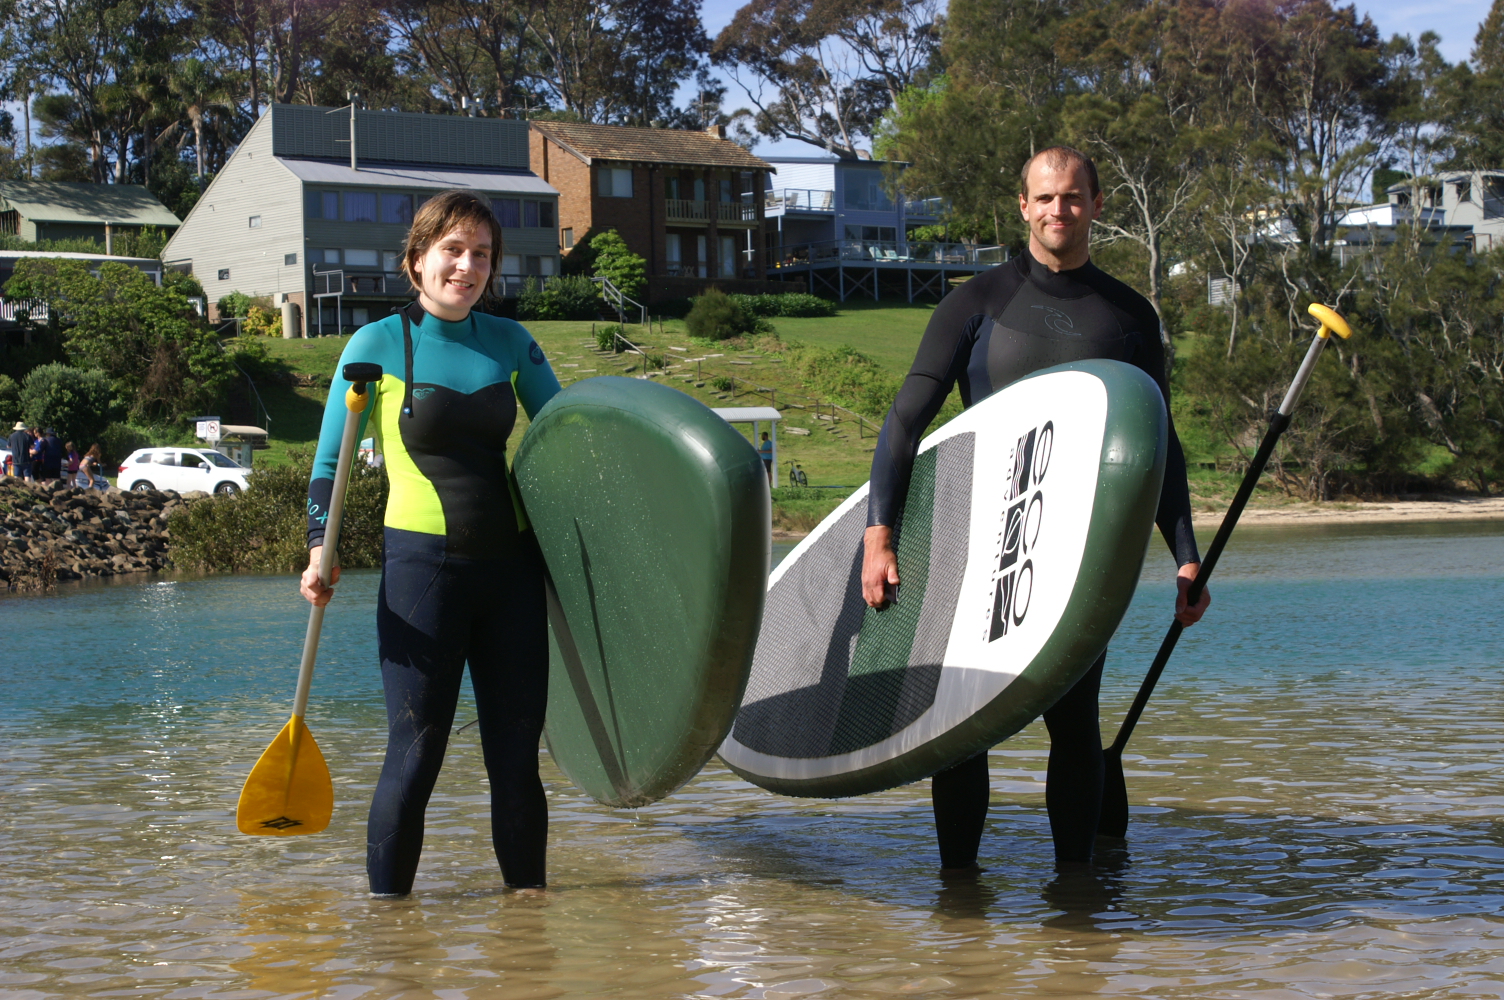 stand up paddle equipment for hire